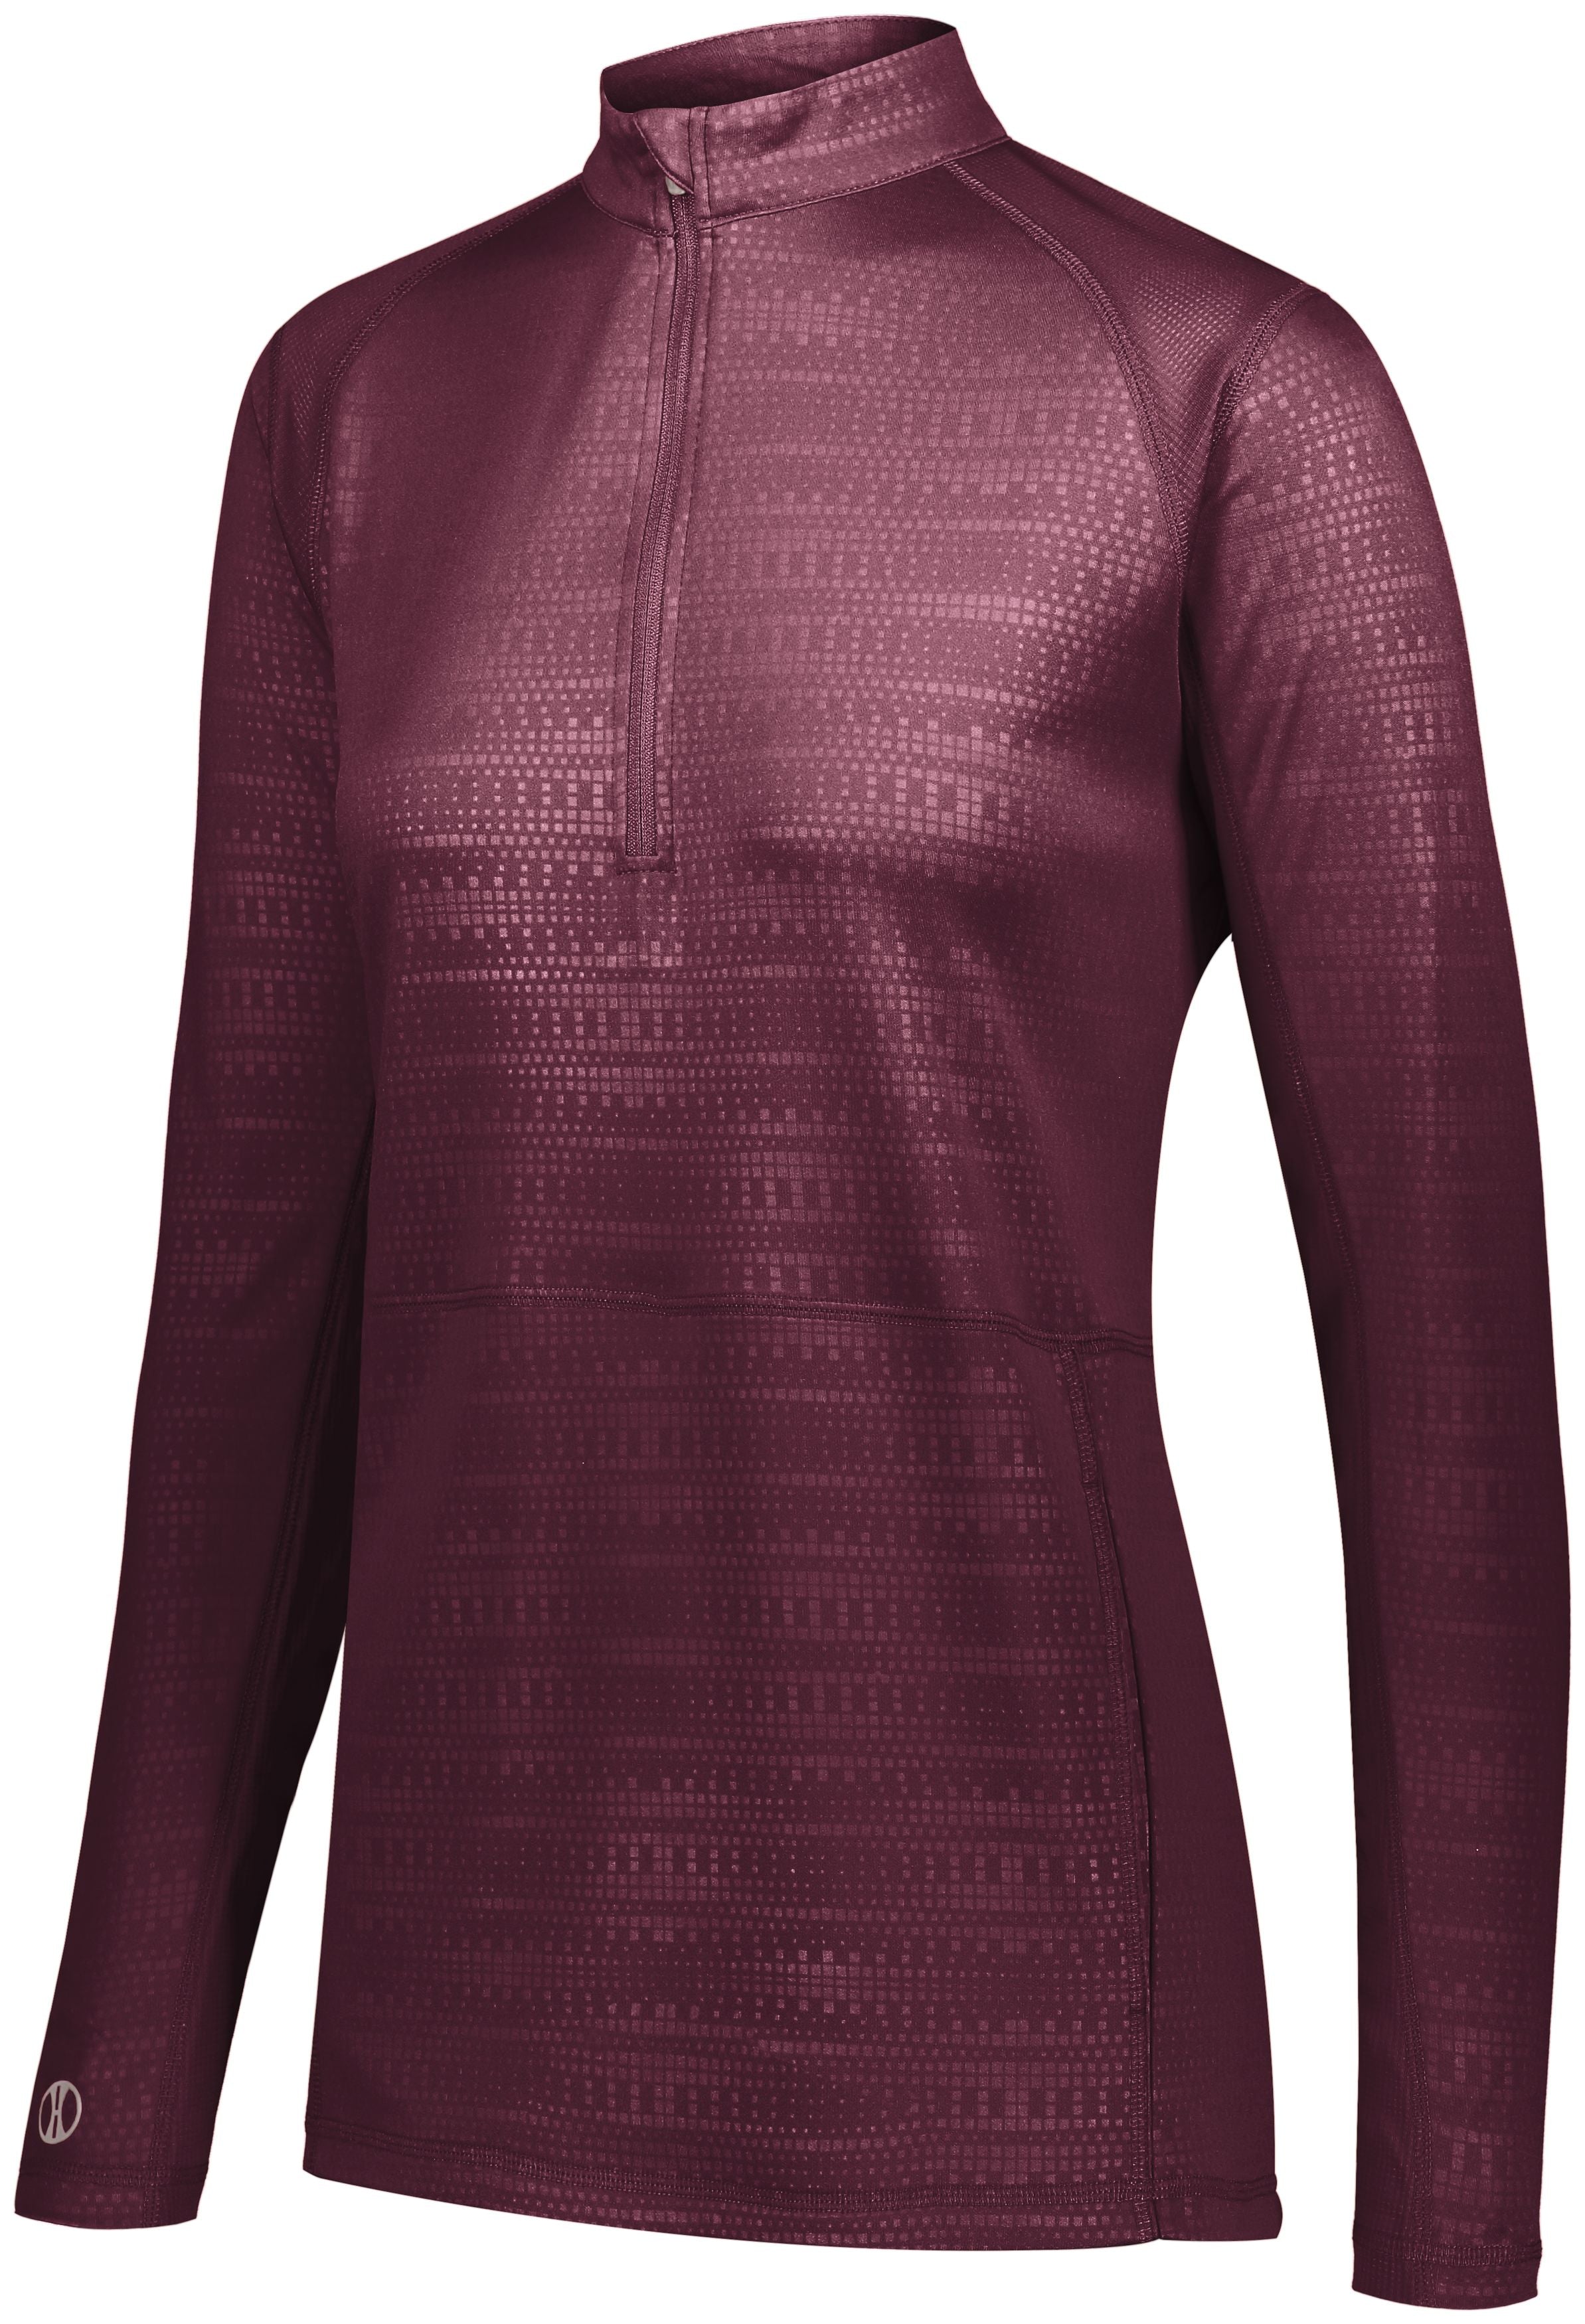 Holloway Ladies Converge 1/2 Zip Pullover in Maroon (Hlw)  -Part of the Ladies, Holloway, Shirts, Corporate-Collection, Converge-Collection product lines at KanaleyCreations.com